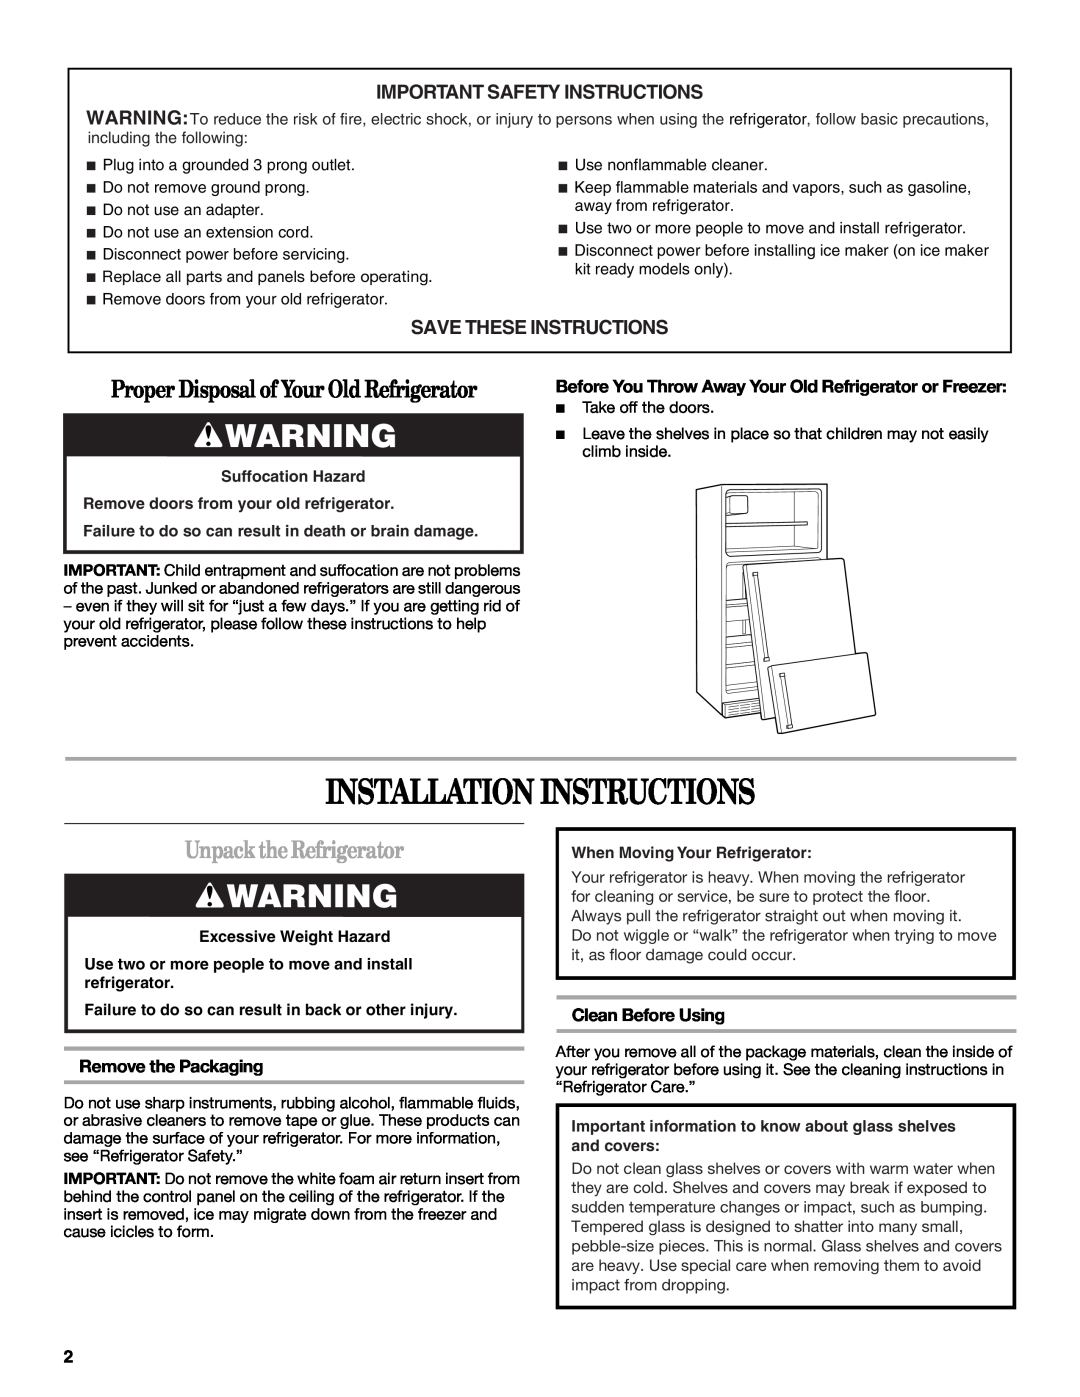 Whirlpool W10208839A Installation Instructions, Unpack the Refrigerator, Important Safety Instructions, Clean Before Using 